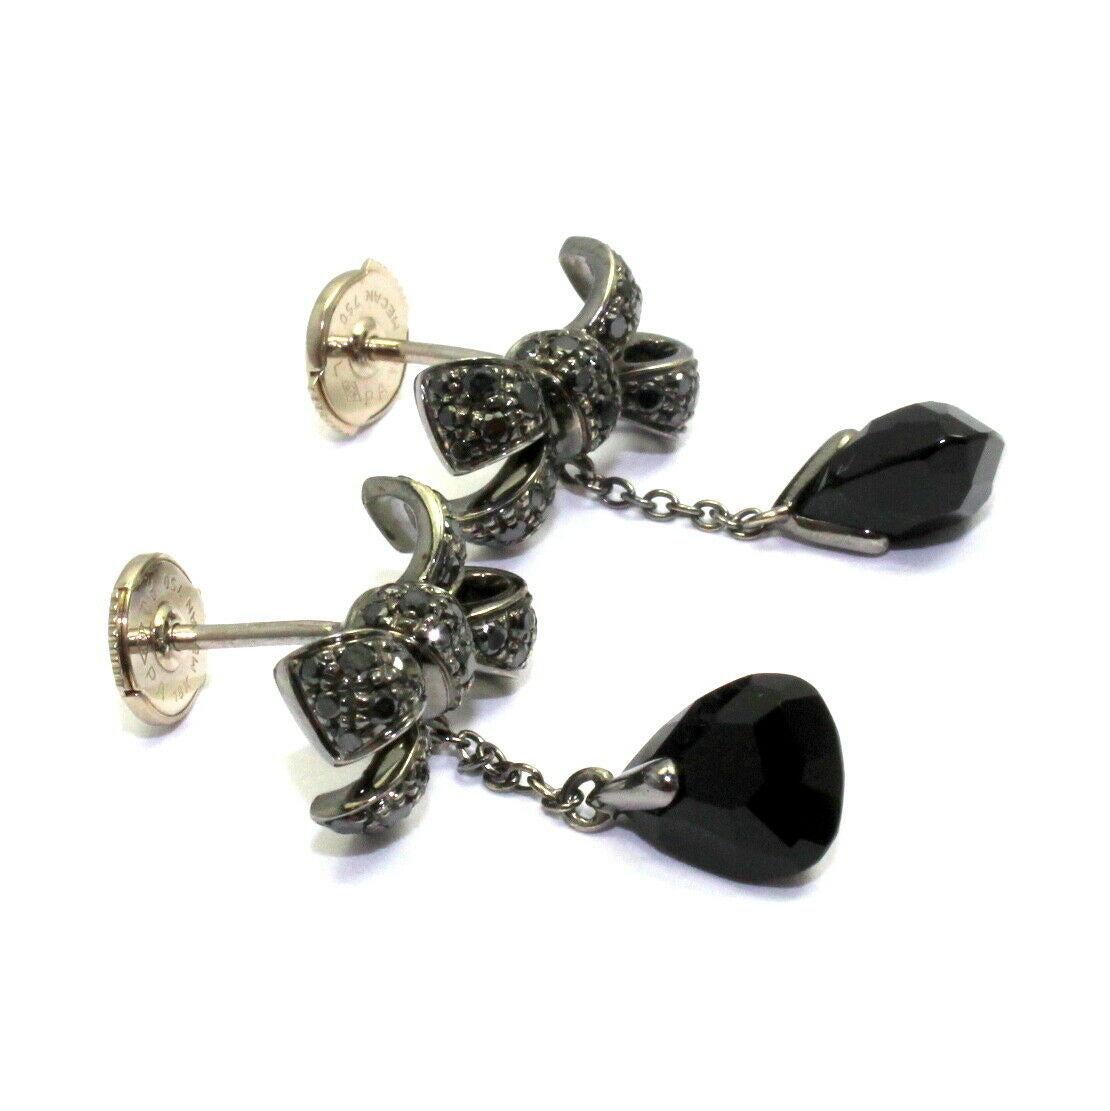 18k Blackened White Gold Black Diamond Onyx Drop Bow Earrings by Pomellato. 
With Black diamonds - 0.64ctw
2x medium onyx briolette cut
These earrings come with original Pomellato box and a certificate. 
Details: 
Measurements: 15.5mm x